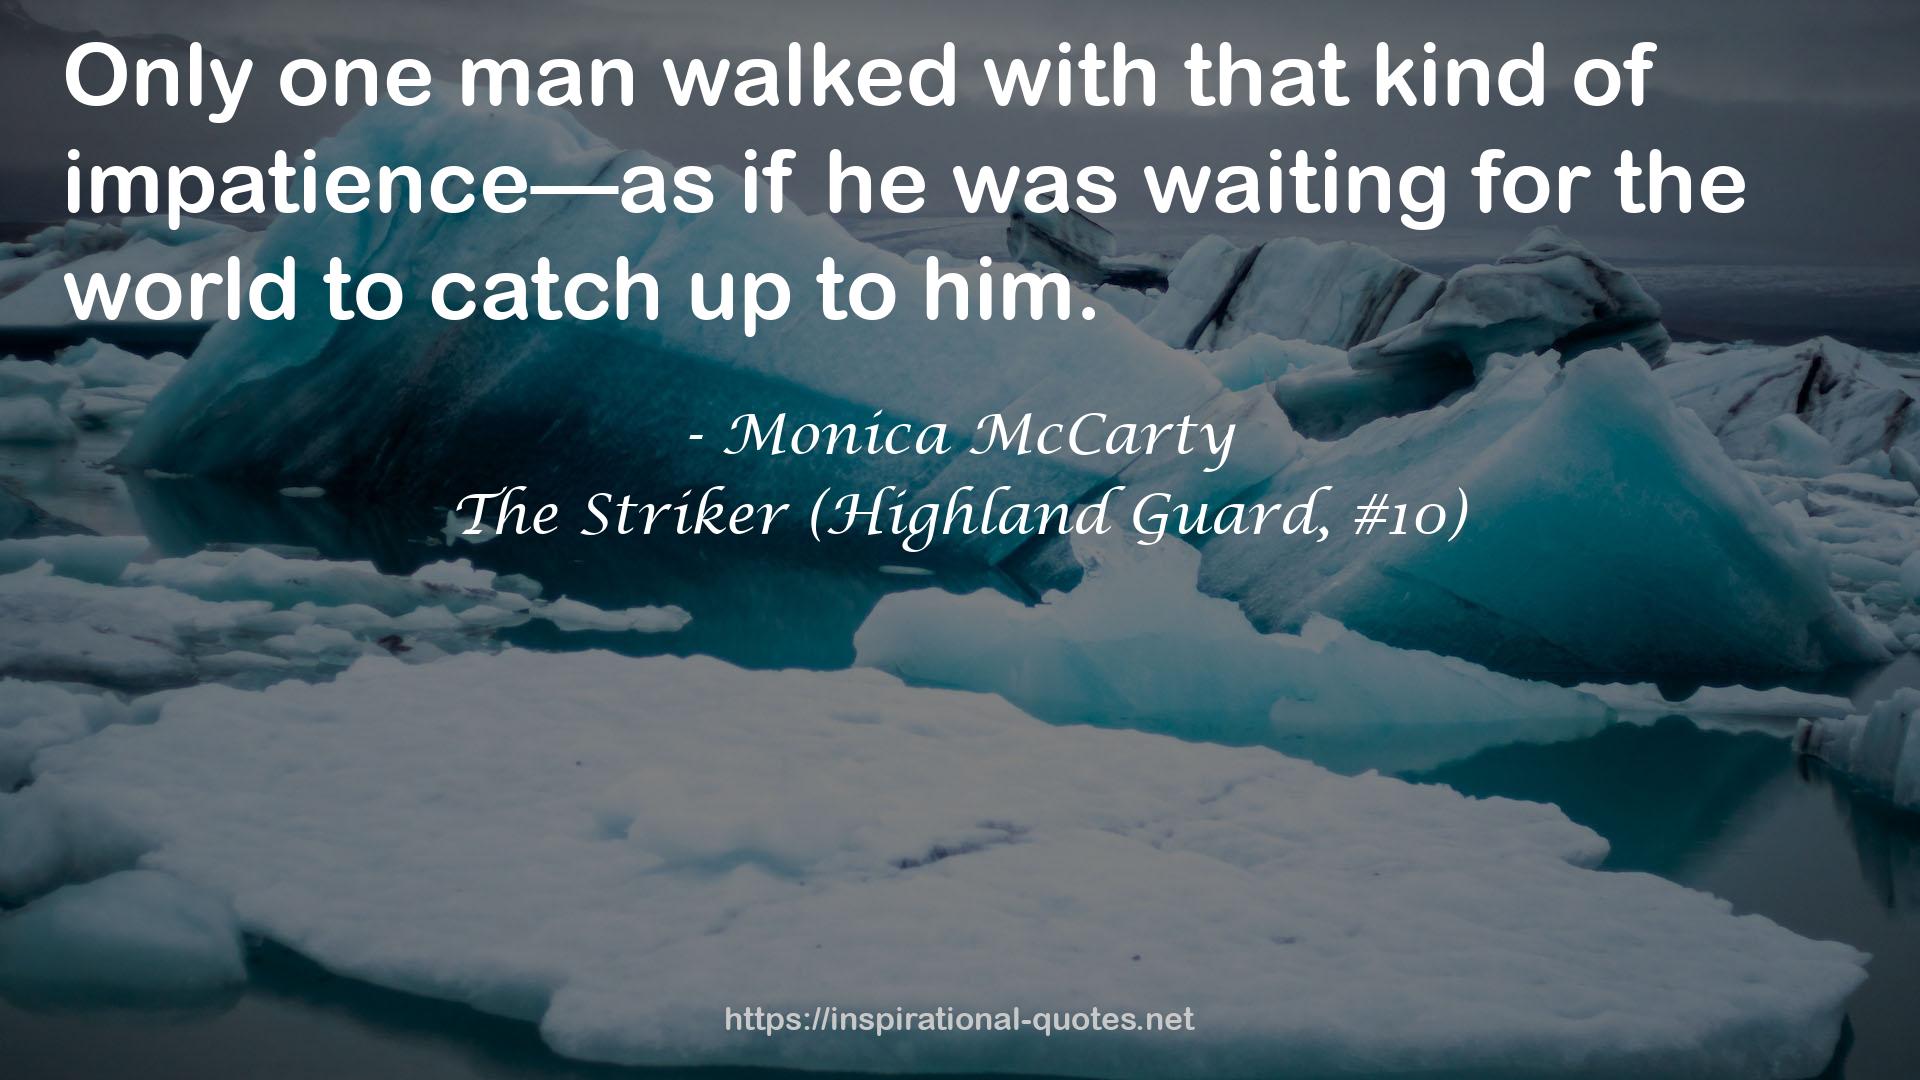 Monica McCarty QUOTES